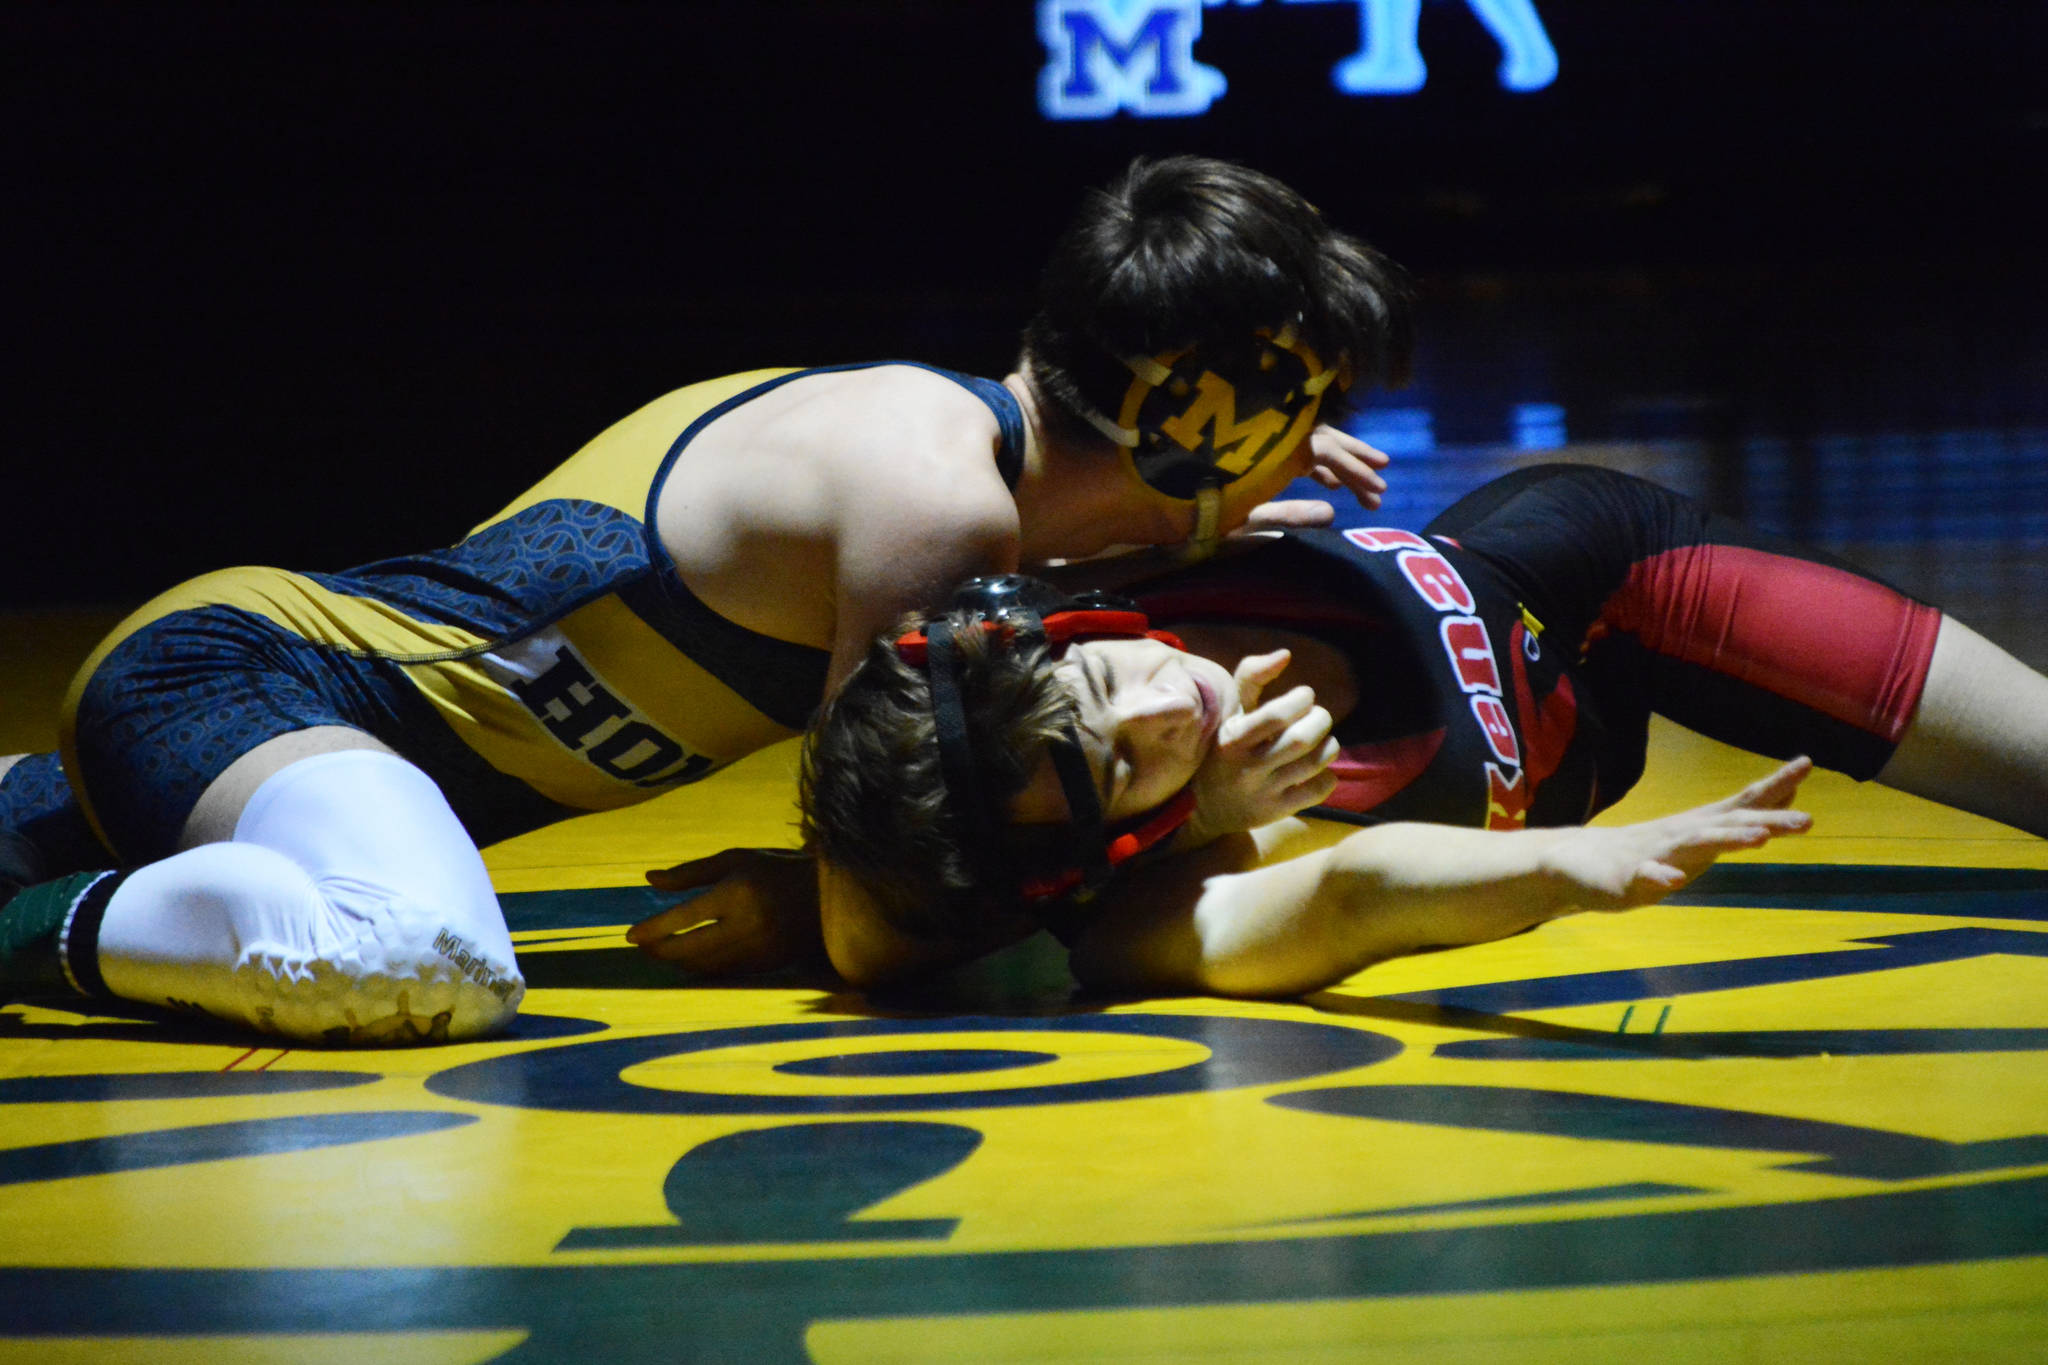 Homer High School Mariner Seth Inama, left, wrestles with Kenai High School Kardinal Daemon Duniphin, right, in a meet held Wednesday, Nov. 21, 2018, at the Homer High School Alice Witte Gym in Homer, Alaska. (Photo by Michael Armstrong/Homer News)